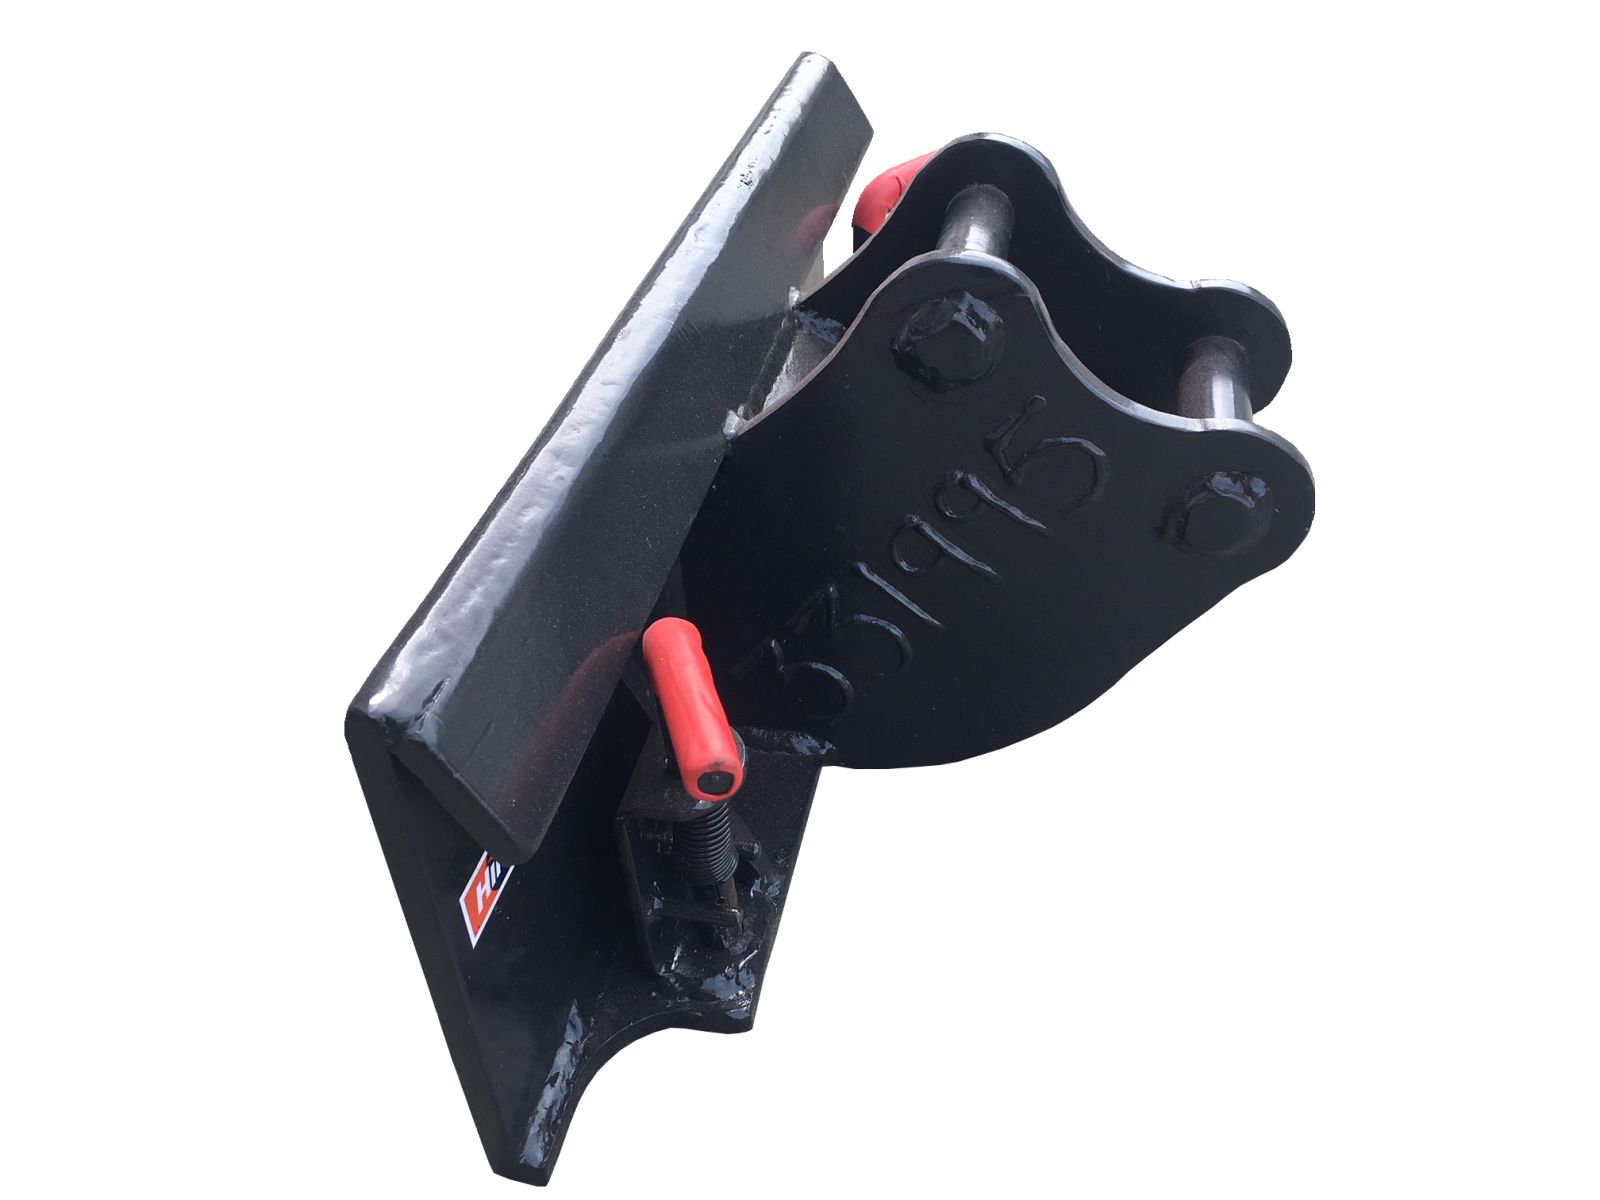 339G Adaptor Plate for Kanga/Dingo Attachments to Fit Excavators